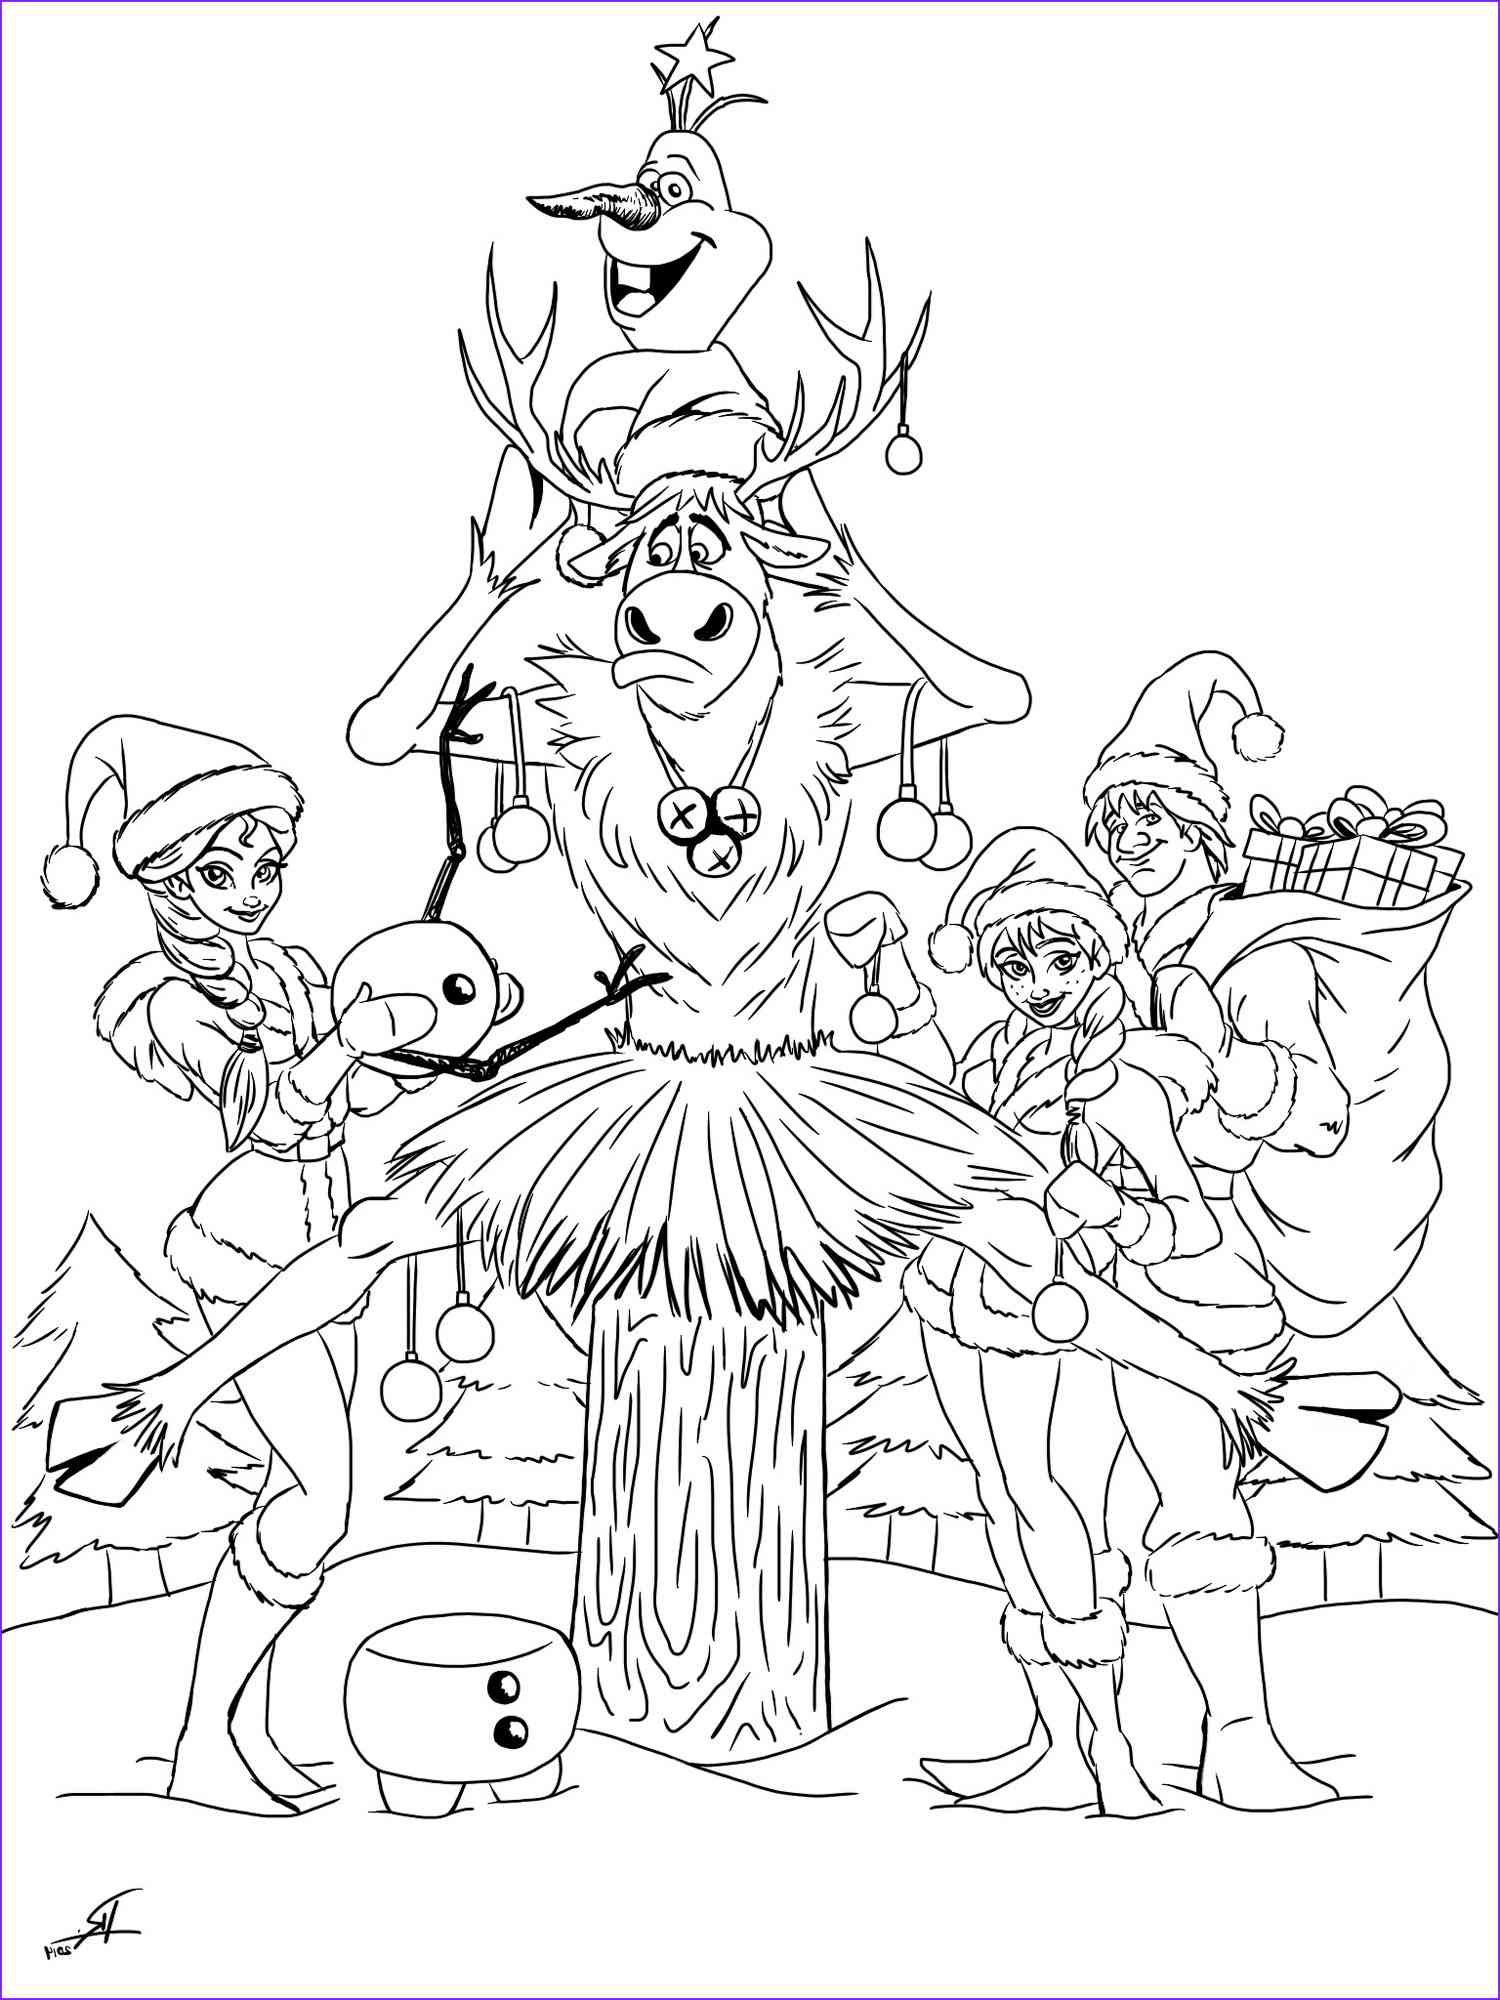 Disney Christmas 19 coloring page